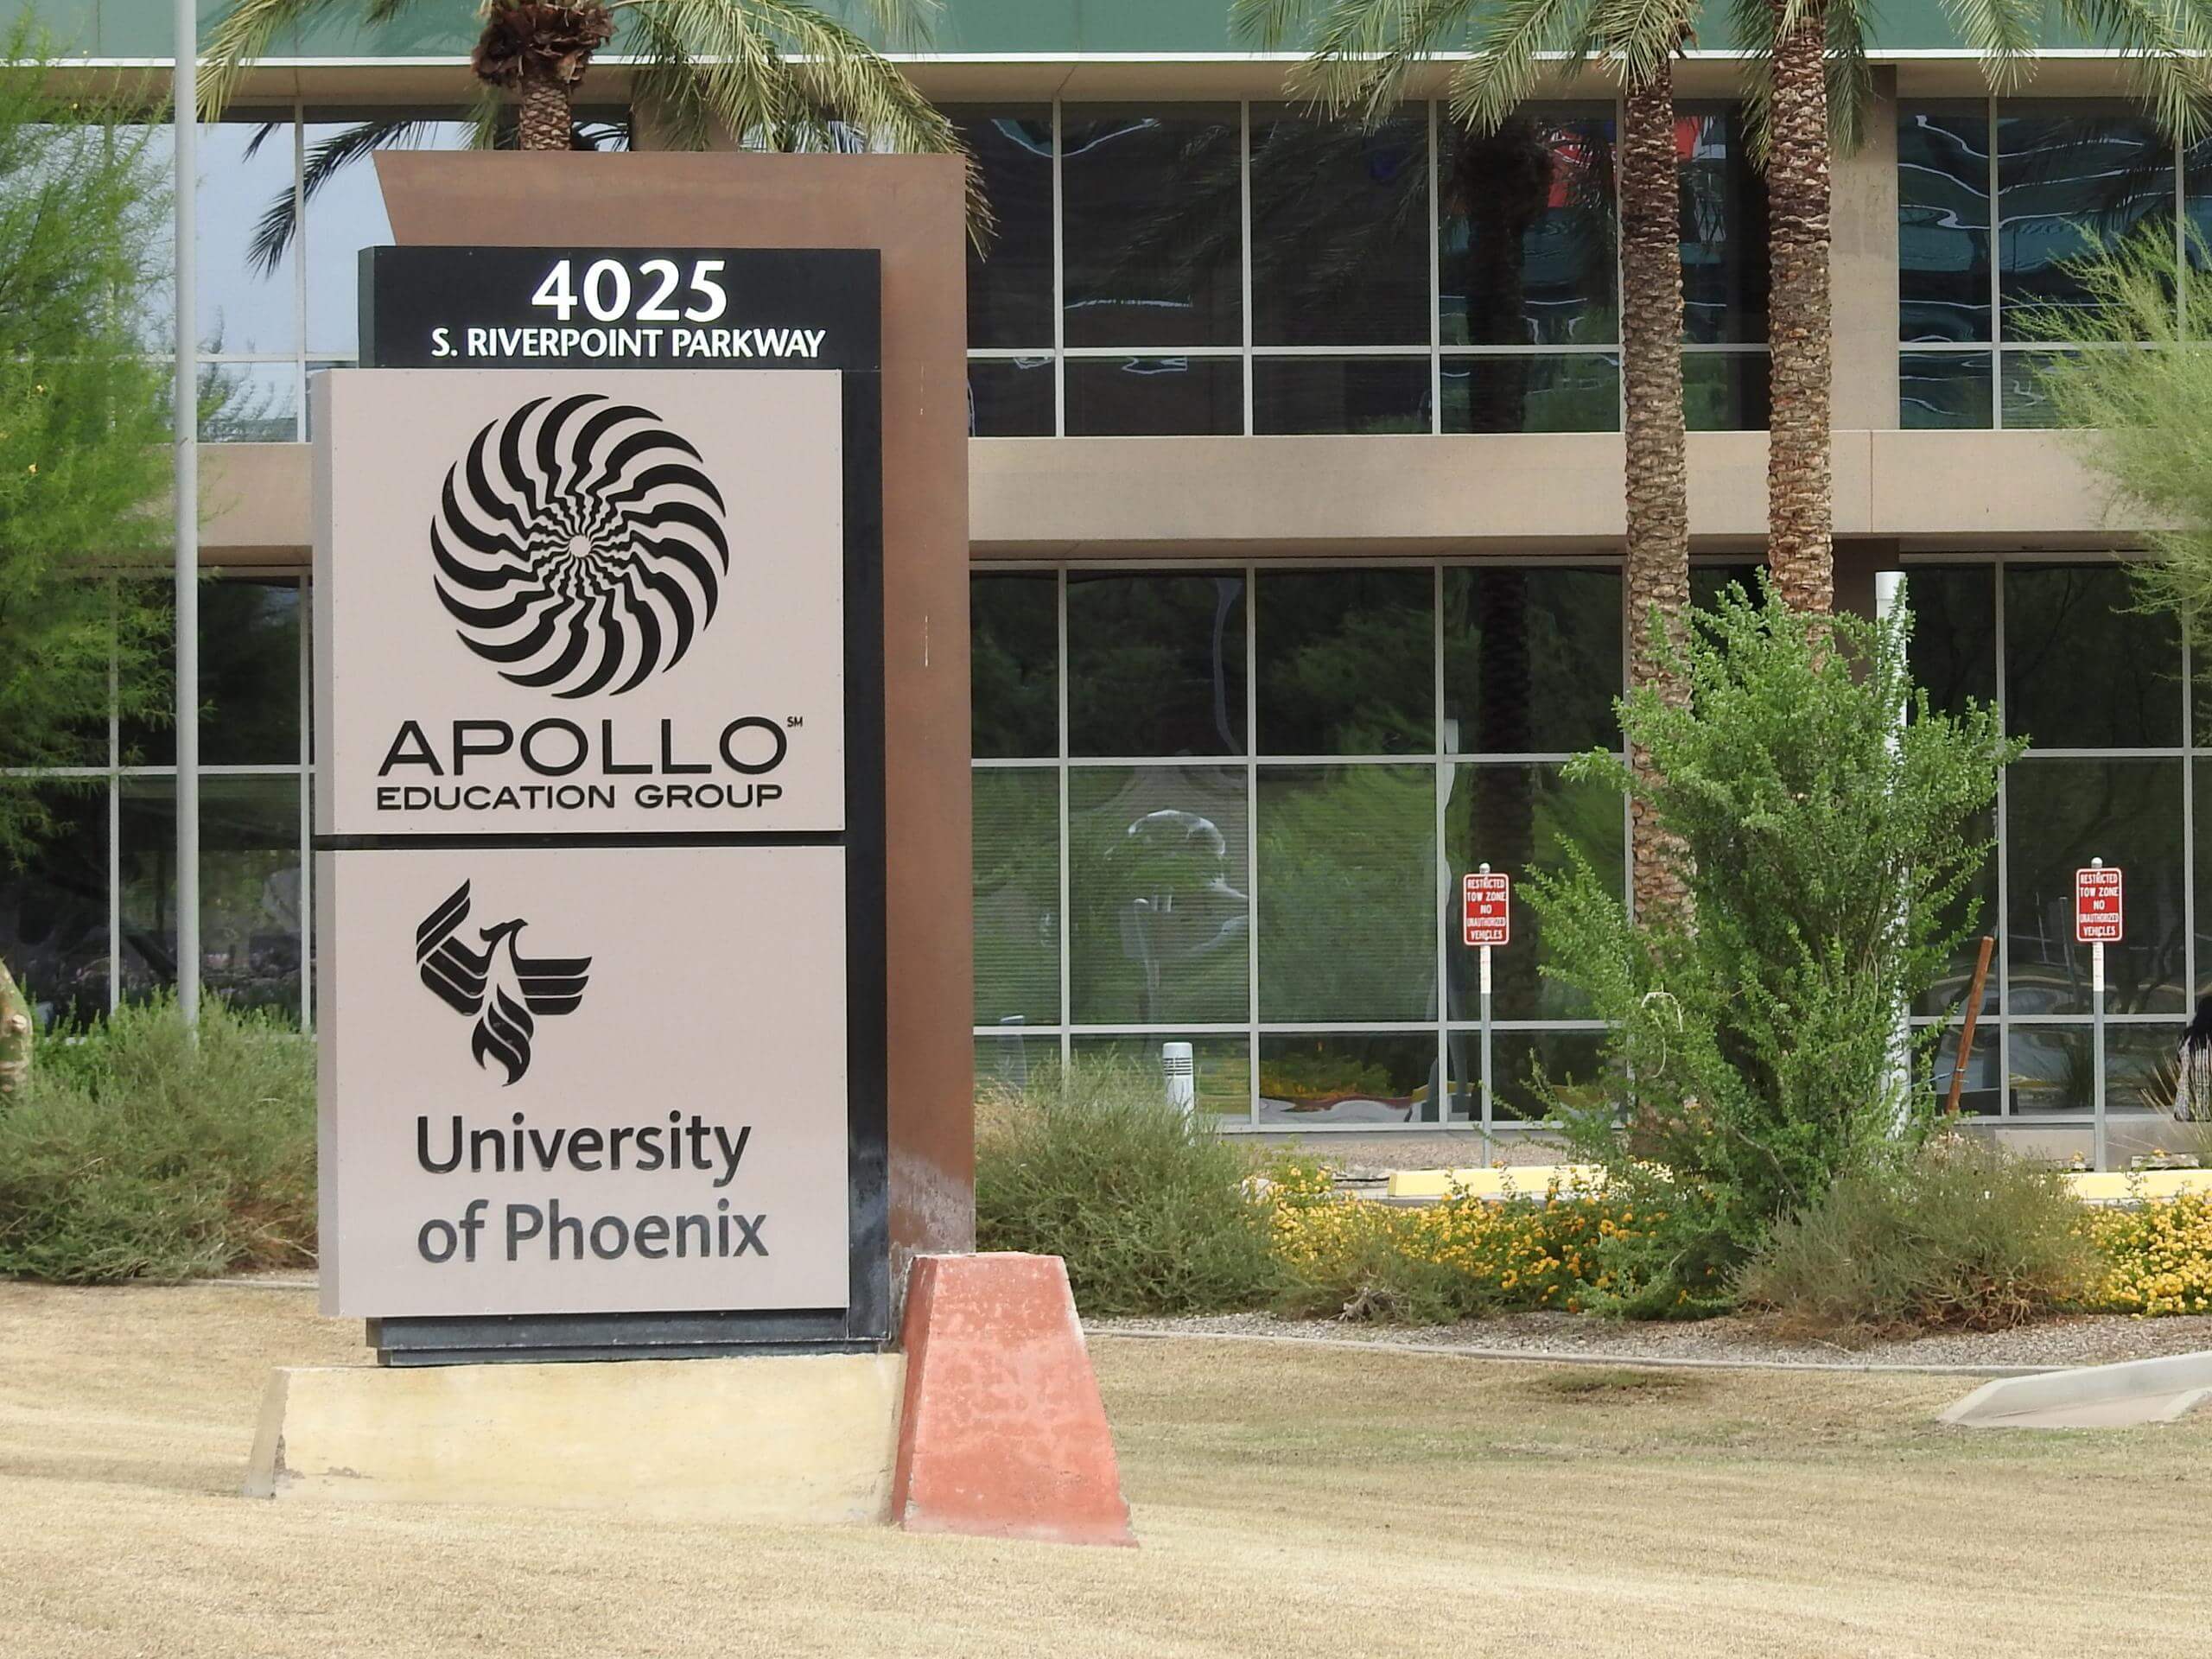 Apollo Education Group Empowering Minds and Shaping Futures